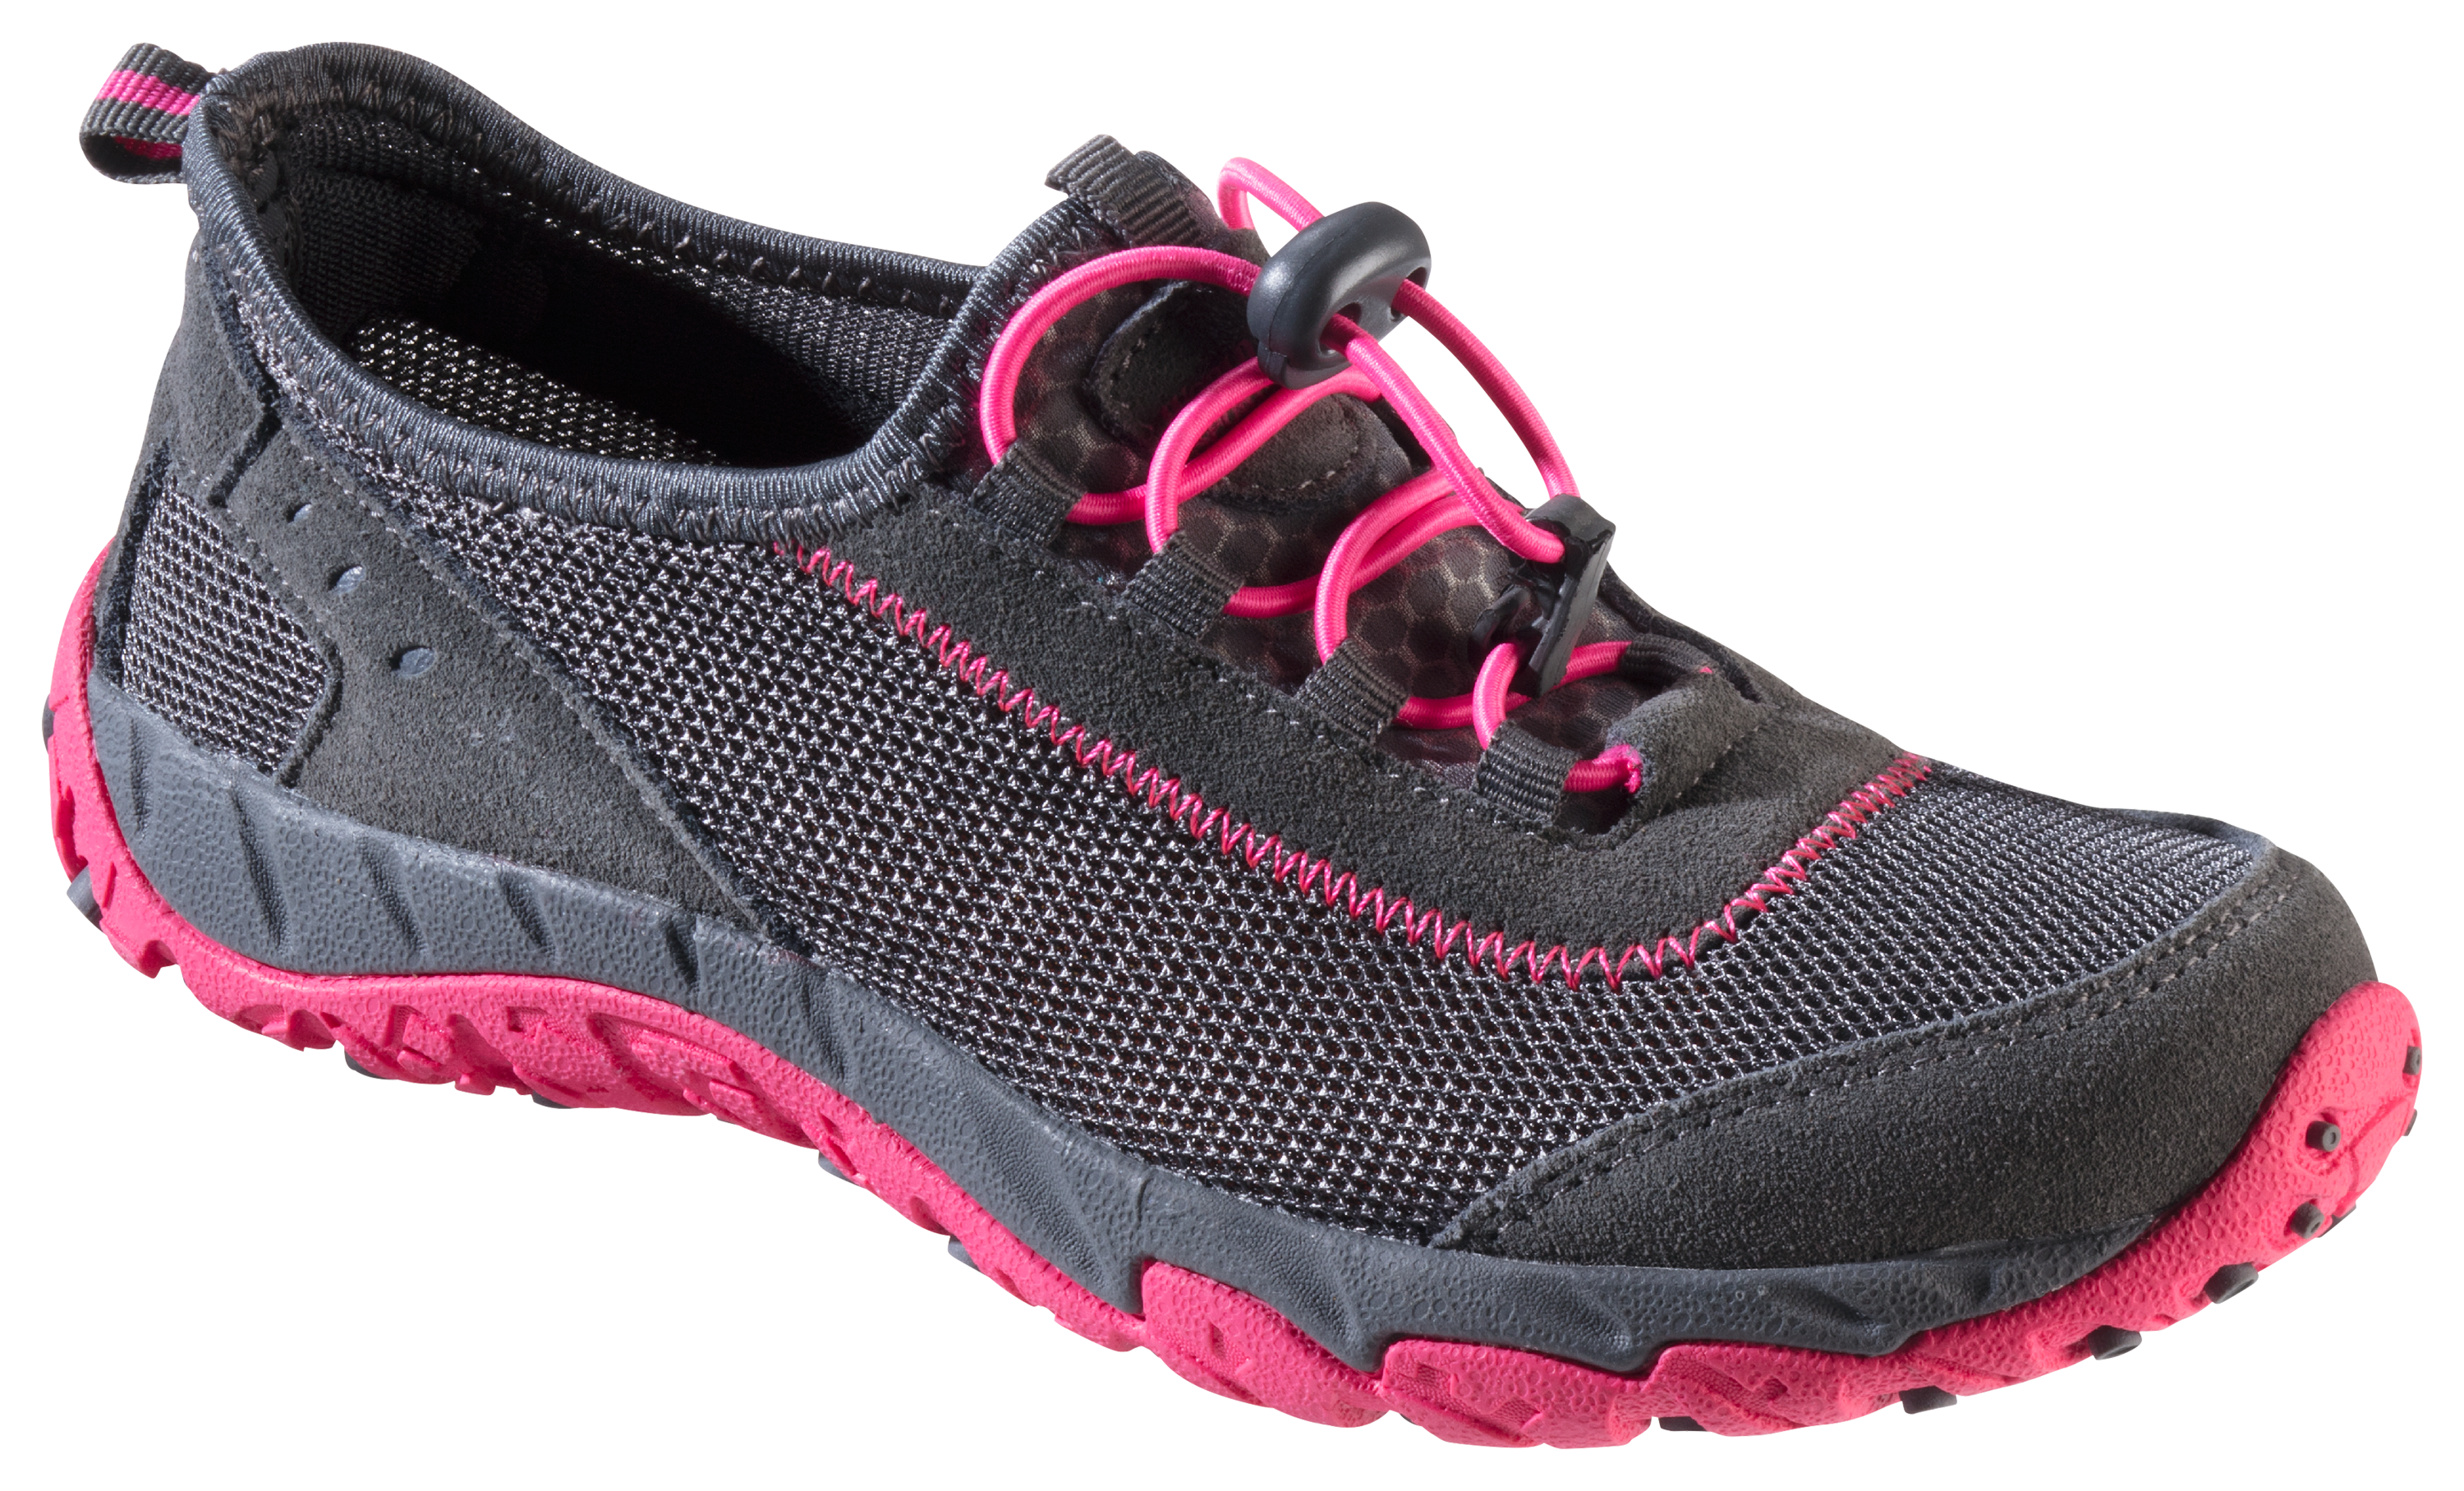 World Wide Sportsman Clear Creek Water Shoes for Ladies - Grey/Pink - 11 M